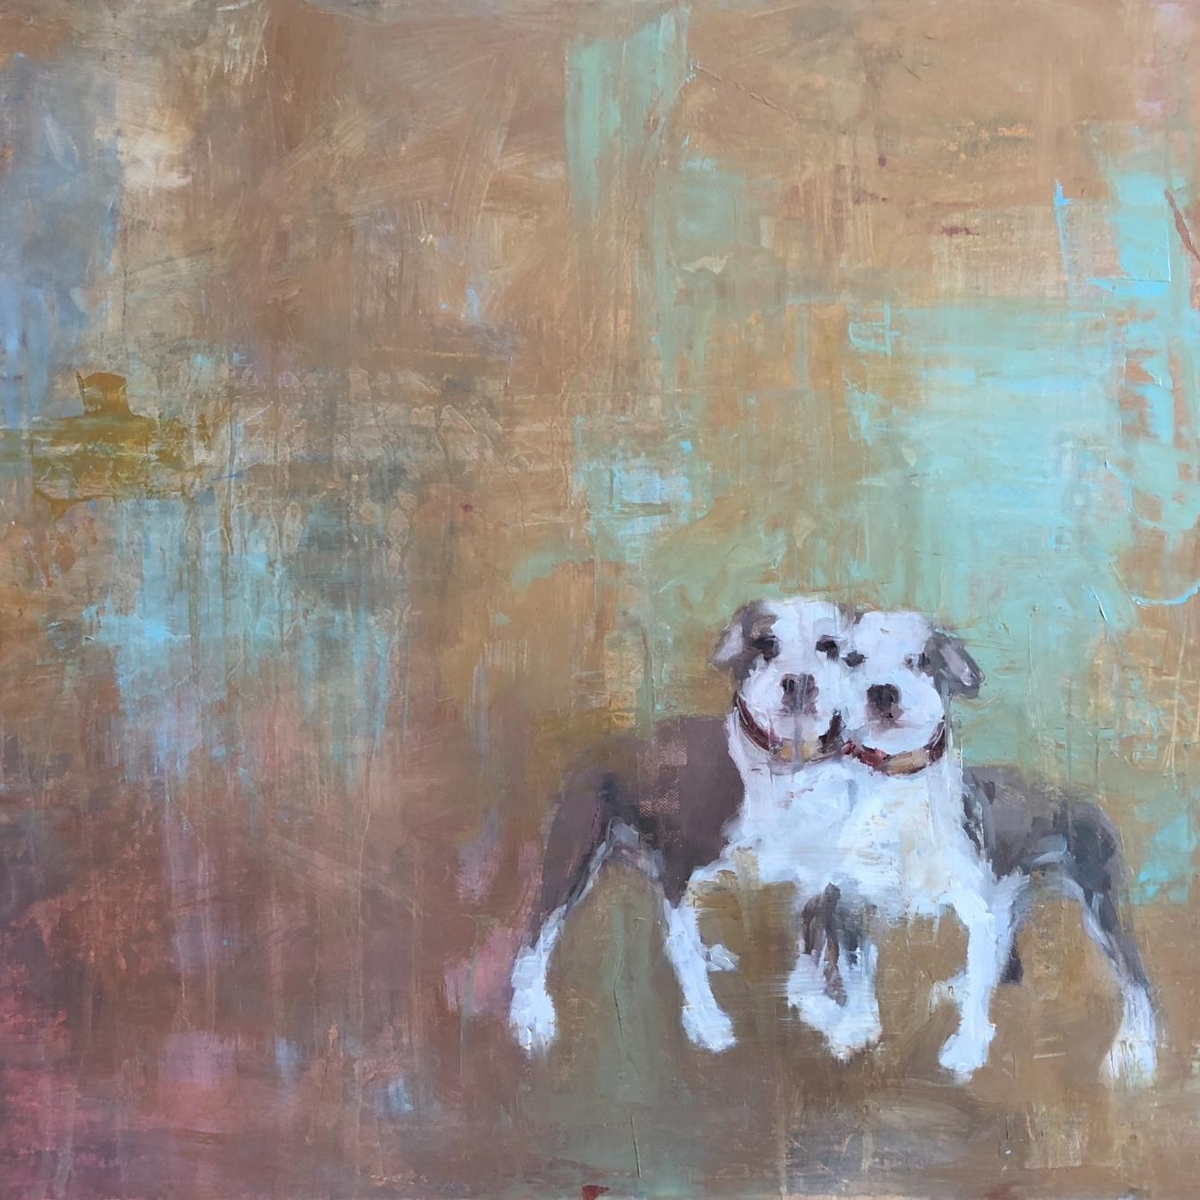 painting of pitbull dog mirrored images